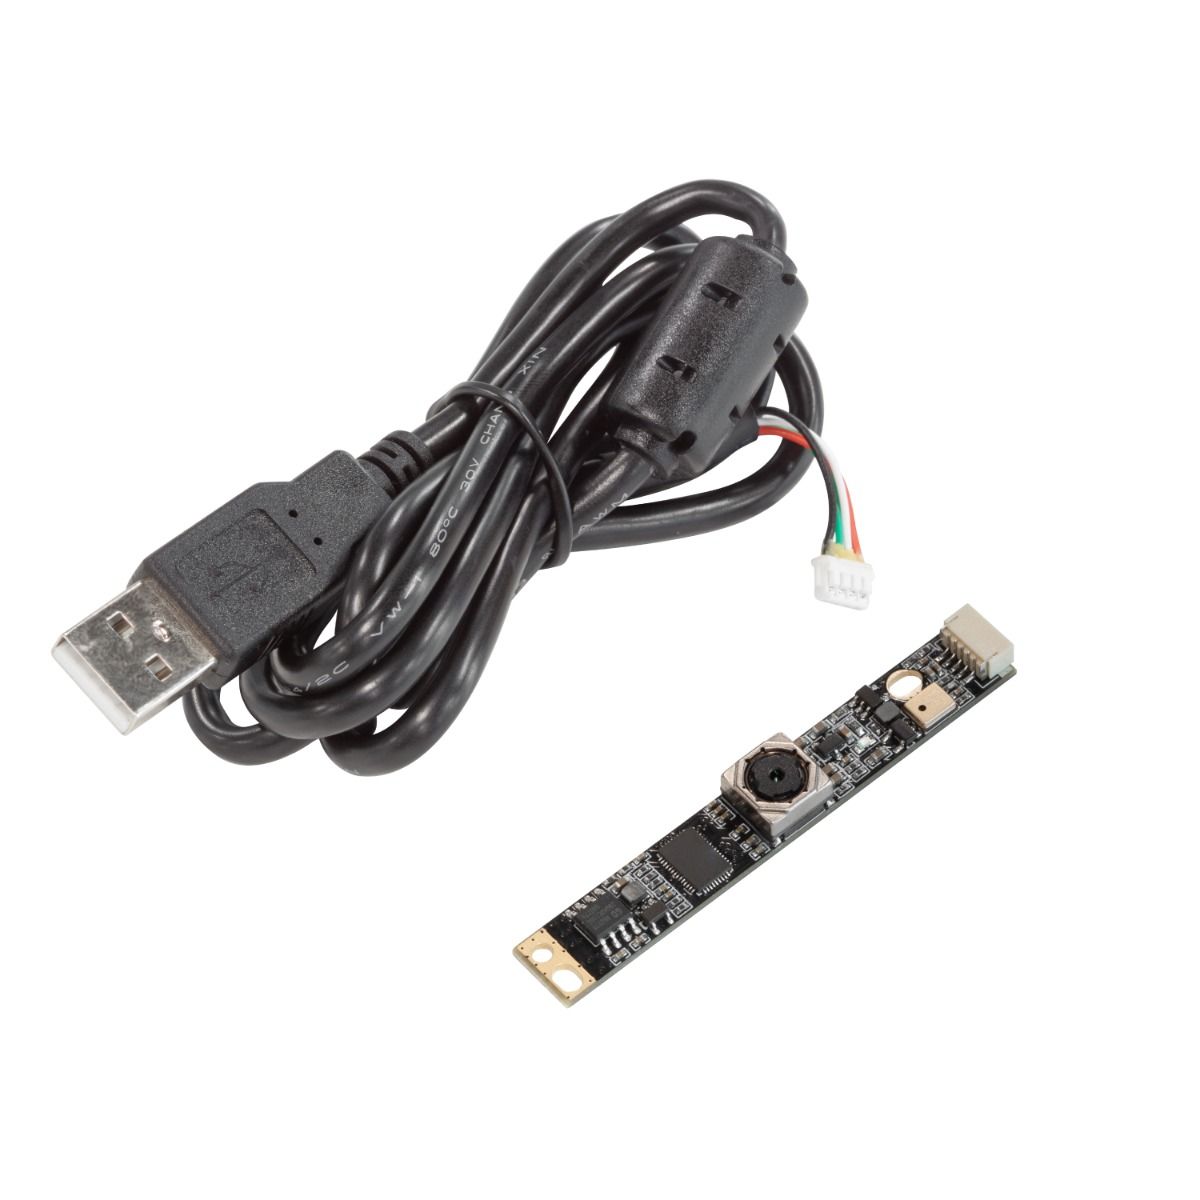 Details about   OMRON  F150 S1A Machine Vision CCD Camera Module W/O Lens or Cable Accessories 